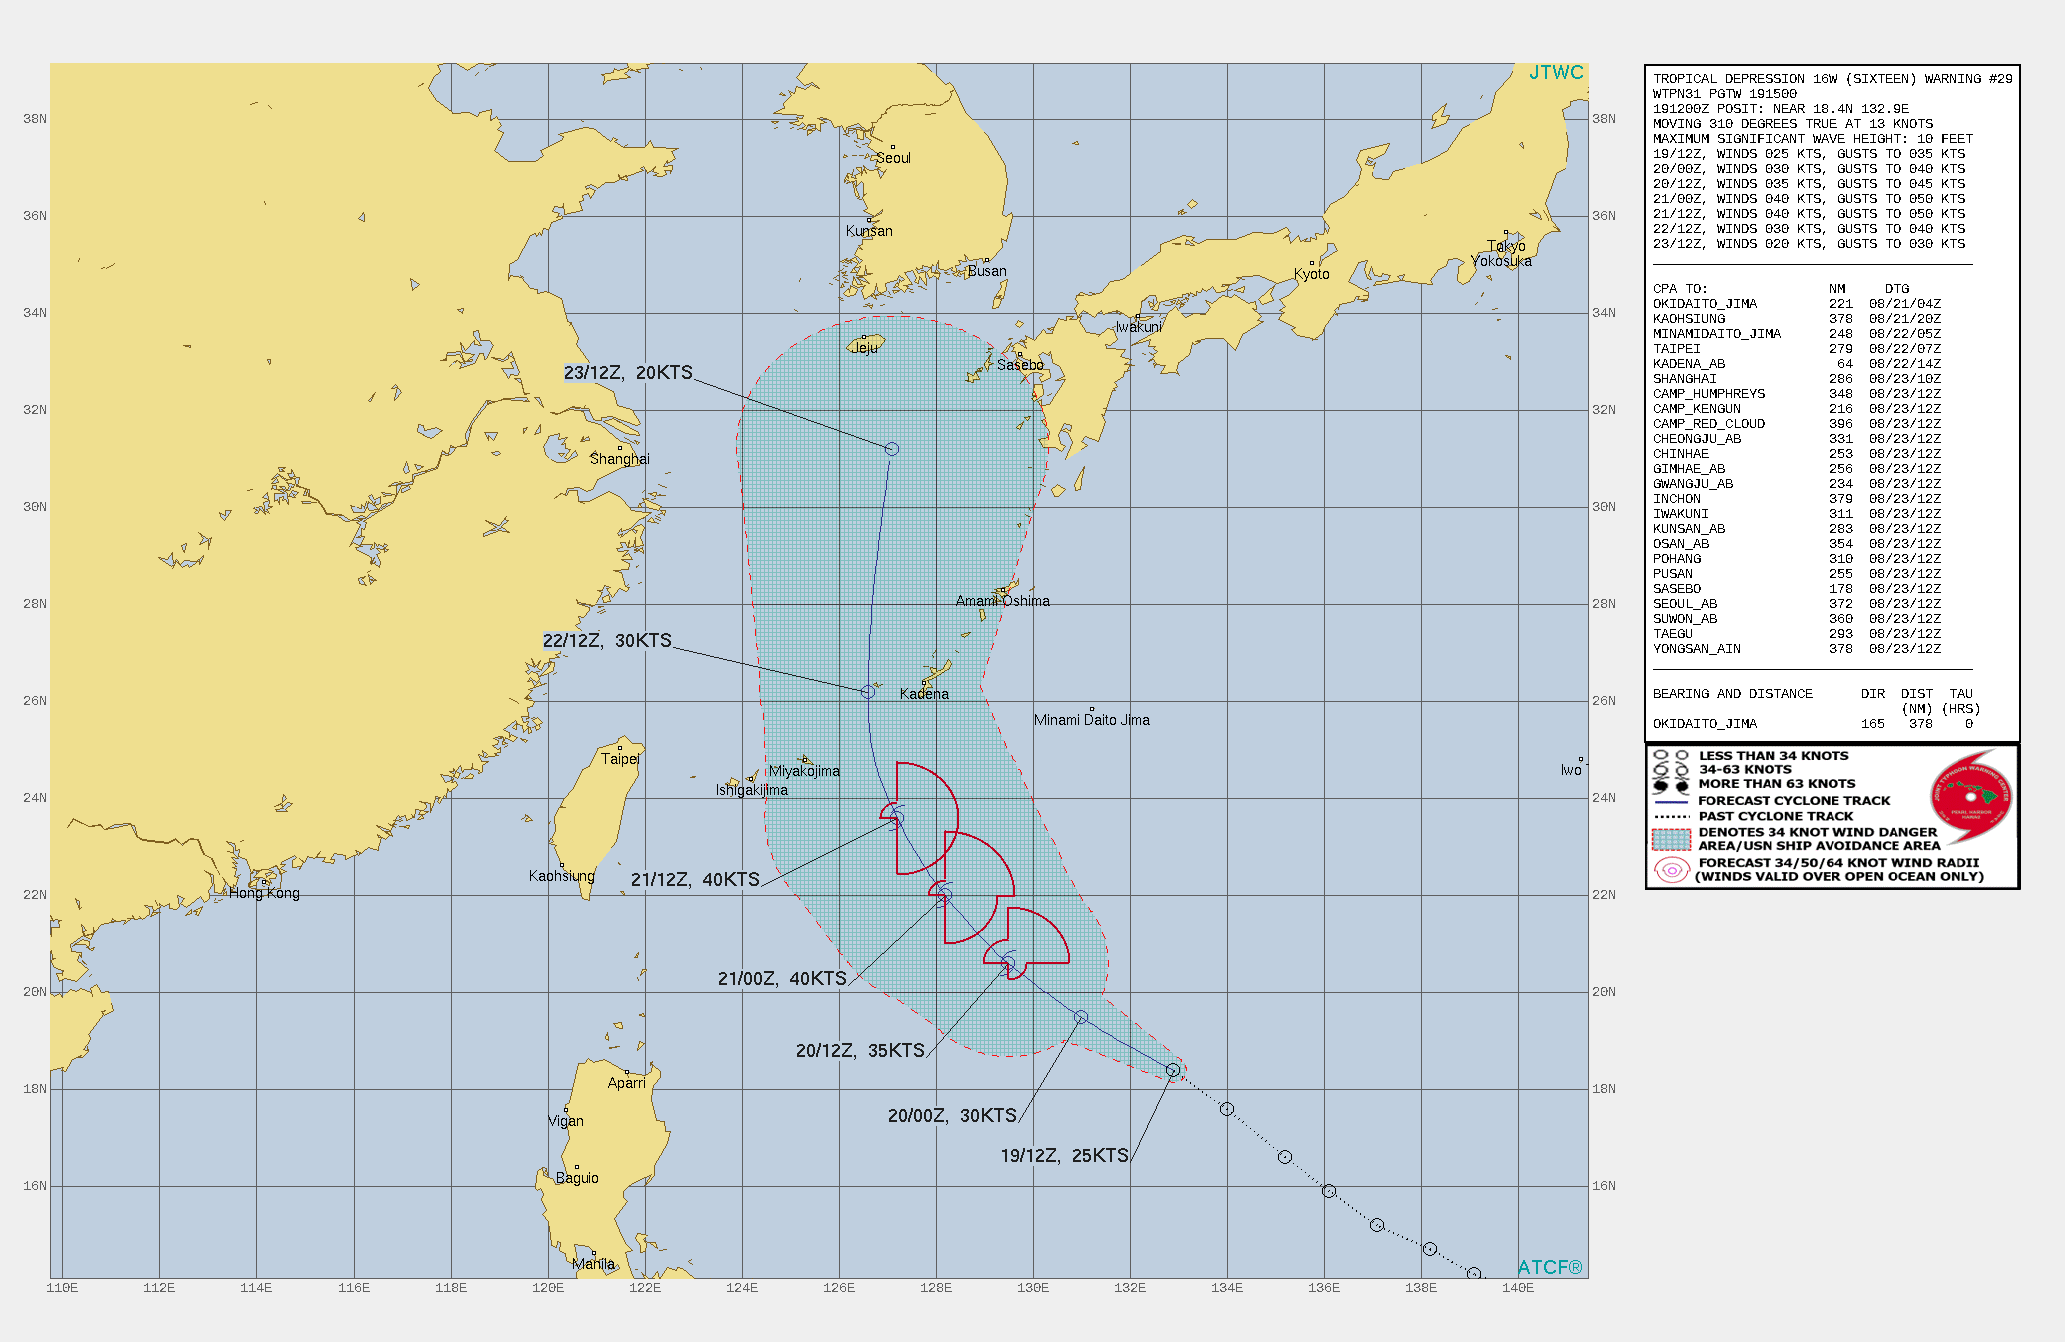 TD 16W. WARNING 29 ISSUED AT 19/15UTC. THIS IS THE INITIAL PROGNOSTIC REASONING MESSAGE AFTER REGENERATION AND ESTABLISHES THE FORECAST PHILOSOPHY.  FORECAST DISCUSSION: TD 16W WILL CONTINUE TO TRACK NORTHWEST ALONG THE SOUTHWEST PERIPHERY OF THE DEEP SUBTROPICAL RIDGE(STR) THROUGH 48H, THEN TURN NORTH BY 72H AS IT APPROACHES A BREAK IN THE STR, THEN ACCELERATE NORTH-NORTHEASTWARD THROUGH THE REMAINDER OF THE FORECAST ALONG THE GRADIENT BETWEEN THE STR AND A MID-LATITUDE TROUGH APPROACHING FROM THE WEST. AS THE UPPER-LEVEL ANTI-CYCLONE ALOFT TRACKS ALONG WITH THE LOW LEVEL CIRCULATION CENTER, PROVIDING A SOURCE OF WEAK RADIAL OUTFLOW ALOFT AND RELATIVELY LOW VERTICAL WIND SHEAR(VWS), THE SYSTEM IS FORECAST TO STEADILY INTENSIFY AT THE CLIMATOLOGICAL RATE OF ROUGHLY ONE T-NUMBER PER DAY, PEAKING AT 40 KNOTS BY 48H. WHILE OVERALL INTENSITY IS EXPECTED TO STEADILY INCREASE, THE LOW-LEVEL WIND FIELD IS FORECAST TO REMAIN ASYMMETRIC, WITH THE HIGHEST WINDS CONFINED TO THE EASTERN HEMISPHERE OF THE SYSTEM. THE SHARP TROUGH CURRENTLY NEAR THE RYUKUS IS NOT EXPECTED TO MOVE MUCH FURTHER TO THE SOUTH OR EAST BUT THE STRONG NORTHEASTERLY FLOW BEHIND IT WILL SERVE AS A WALL UPON WHICH TD 16W WILL ULTIMATELY MEET ITS DEMISE. BETWEEN 48H AND 72H, TD 16W WILL MOVE UNDER THESE STRONG NORTHEASTERLY WINDS ALOFT, EXPERIENCE DRAMATICALLY INCREASED VWS AND CONVERGENCE ALOFT, LEADING TO FAIRLY RAPID DISSIPATION NO LATER THAN 96H.